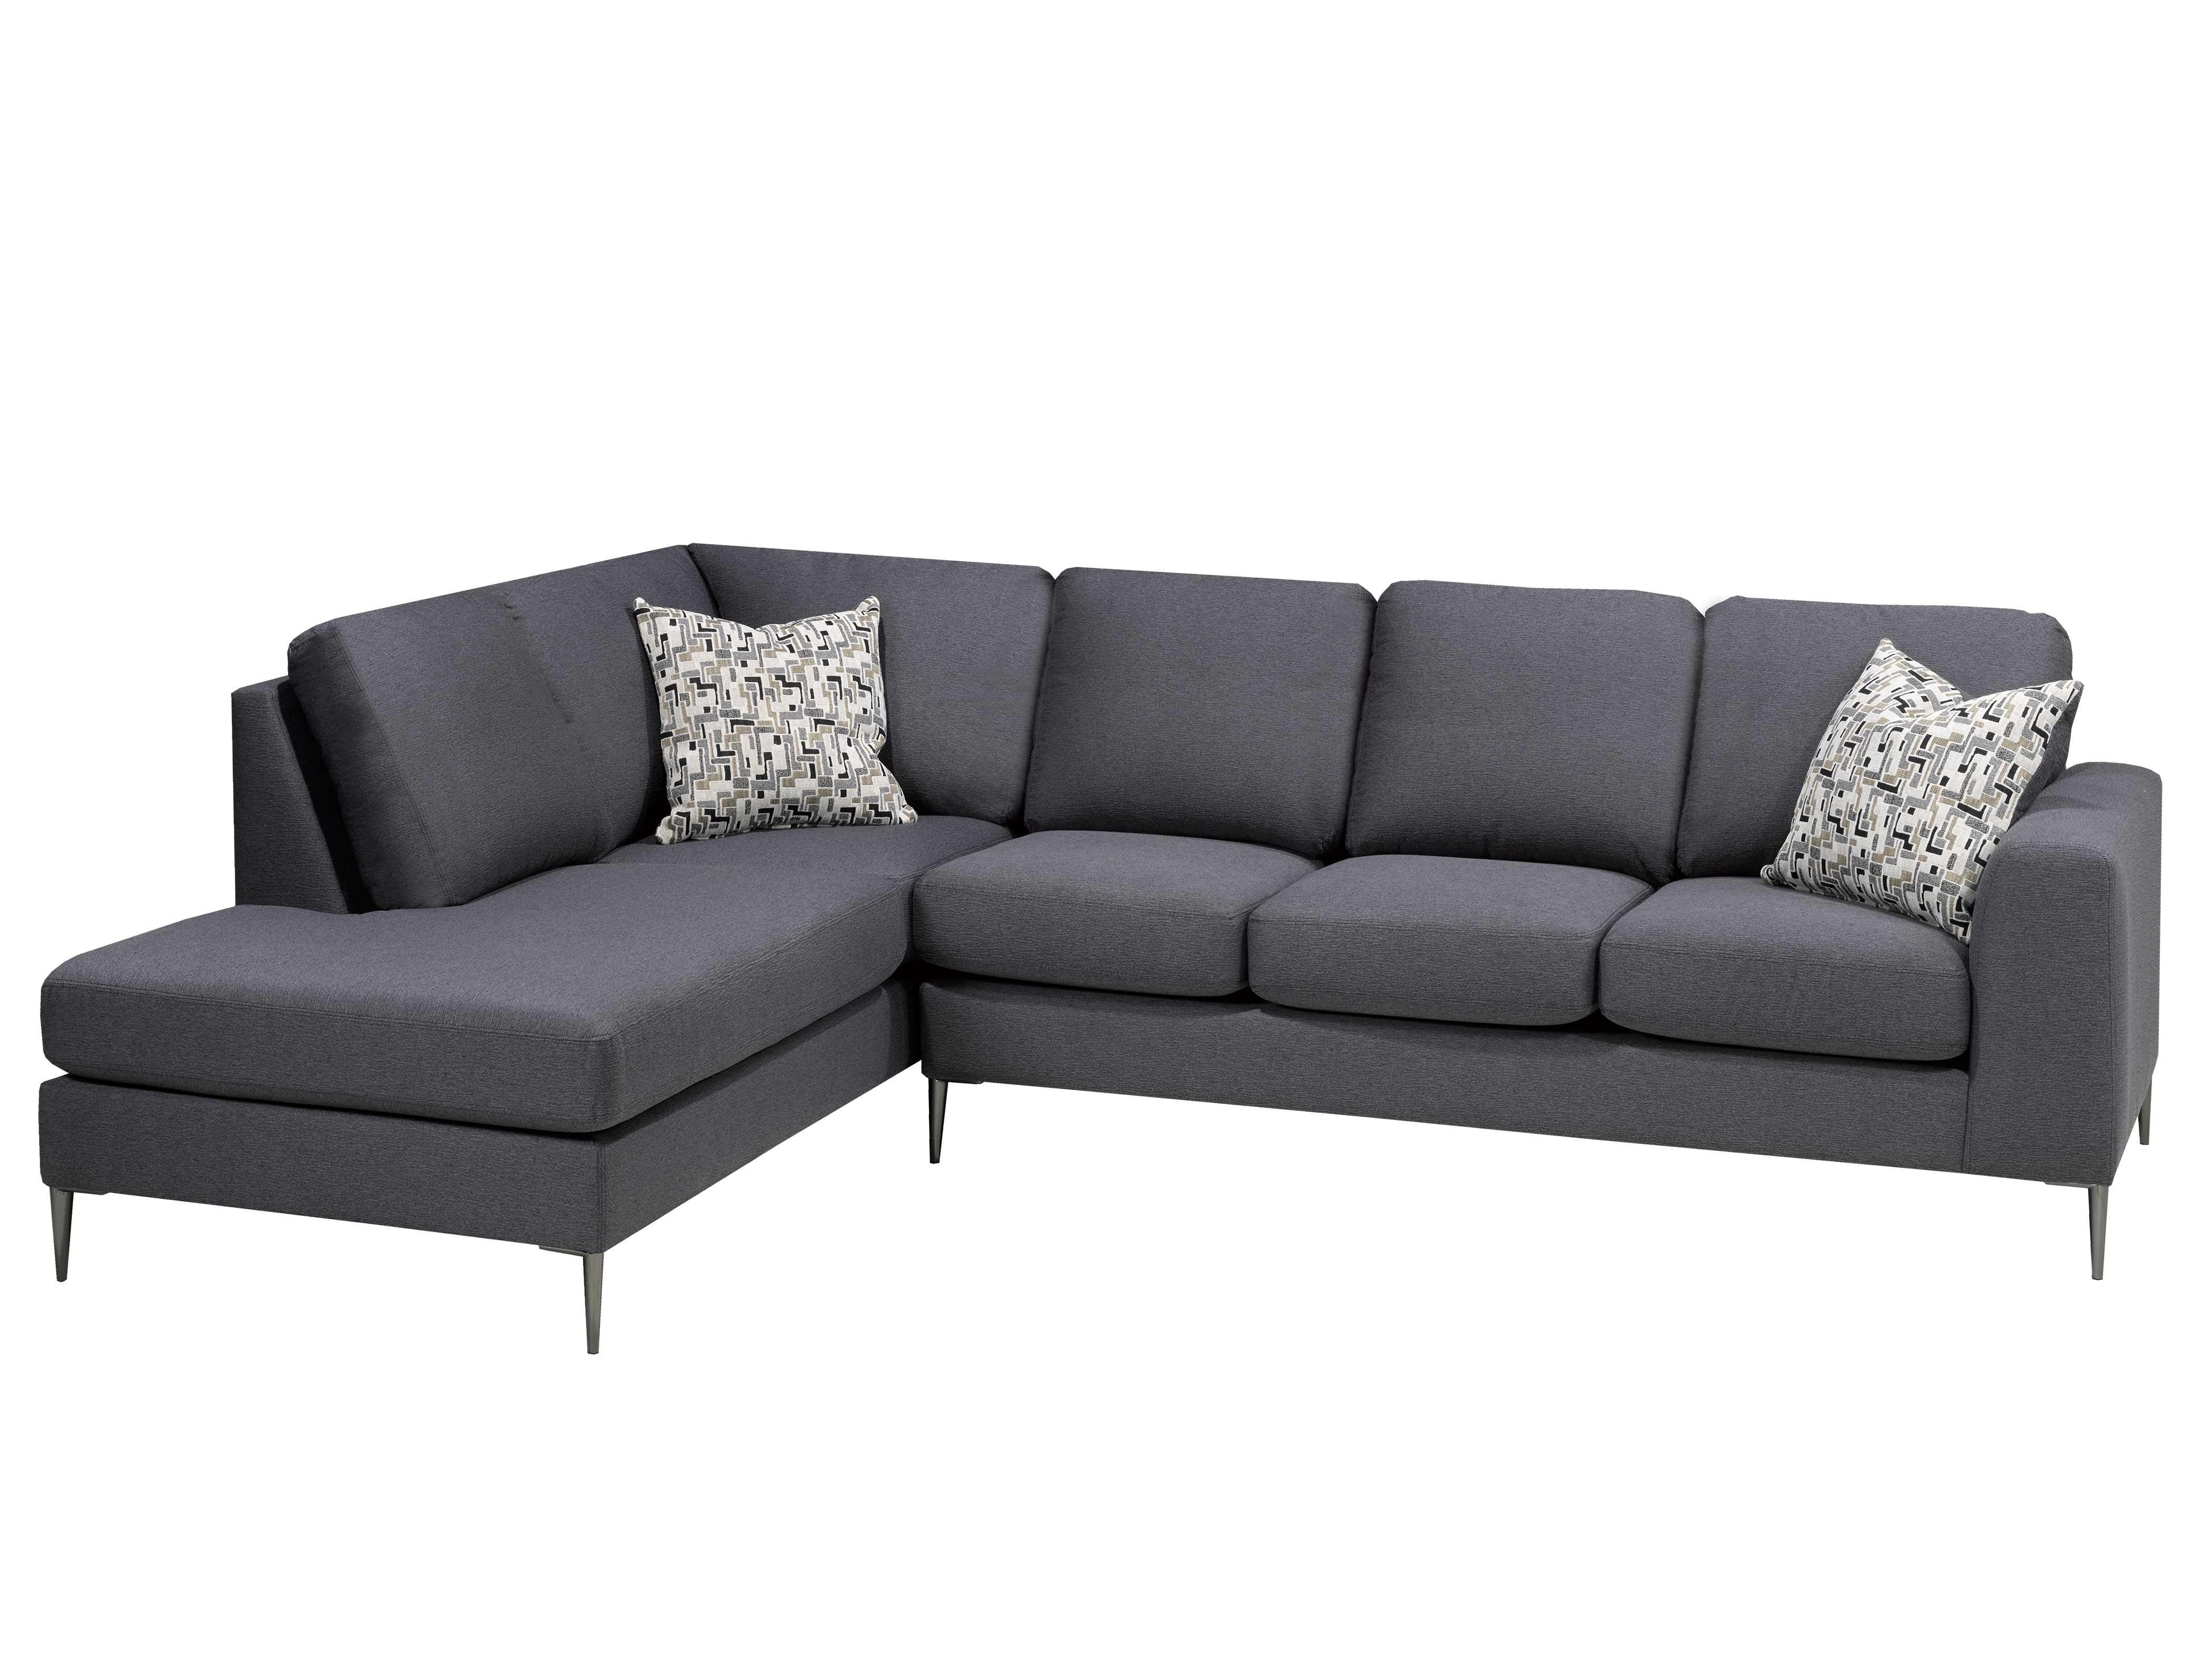 Canadian Made Jargon Charcoal Sectional Sofa 9865